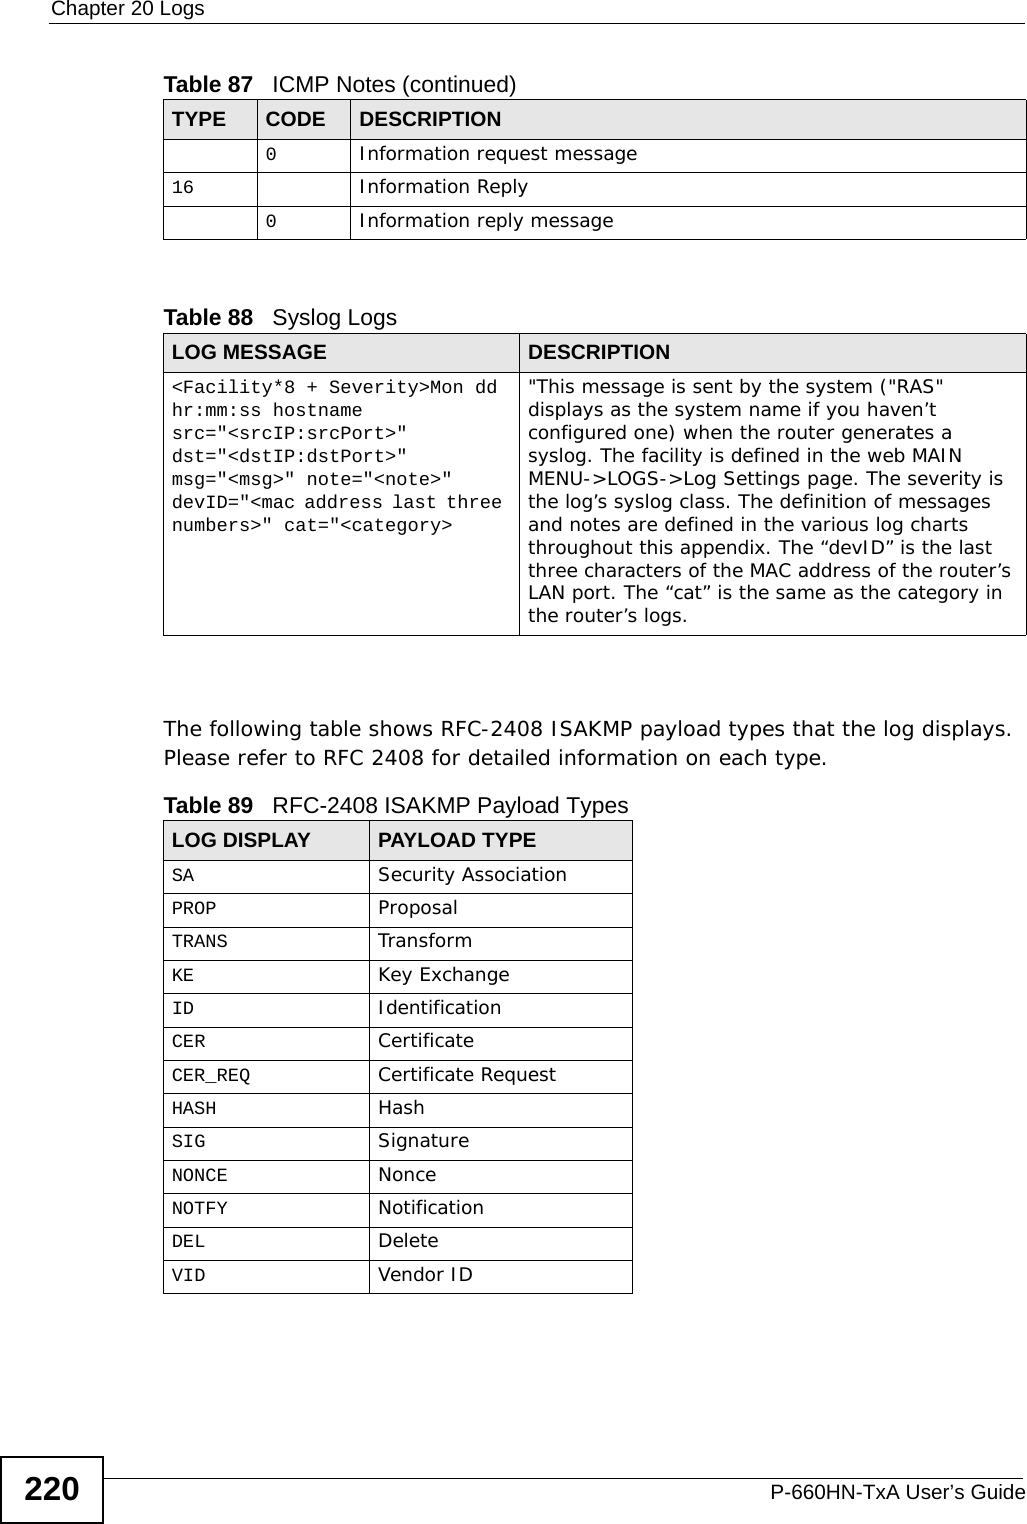 Chapter 20 LogsP-660HN-TxA User’s Guide220 The following table shows RFC-2408 ISAKMP payload types that the log displays. Please refer to RFC 2408 for detailed information on each type. 0Information request message16 Information Reply0Information reply messageTable 88   Syslog LogsLOG MESSAGE DESCRIPTION&lt;Facility*8 + Severity&gt;Mon dd hr:mm:ss hostname src=&quot;&lt;srcIP:srcPort&gt;&quot; dst=&quot;&lt;dstIP:dstPort&gt;&quot; msg=&quot;&lt;msg&gt;&quot; note=&quot;&lt;note&gt;&quot; devID=&quot;&lt;mac address last three numbers&gt;&quot; cat=&quot;&lt;category&gt;&quot;This message is sent by the system (&quot;RAS&quot; displays as the system name if you haven’t configured one) when the router generates a syslog. The facility is defined in the web MAIN MENU-&gt;LOGS-&gt;Log Settings page. The severity is the log’s syslog class. The definition of messages and notes are defined in the various log charts throughout this appendix. The “devID” is the last three characters of the MAC address of the router’s LAN port. The “cat” is the same as the category in the router’s logs.Table 89   RFC-2408 ISAKMP Payload TypesLOG DISPLAY PAYLOAD TYPESA Security AssociationPROP ProposalTRANS TransformKE Key ExchangeID IdentificationCER CertificateCER_REQ Certificate RequestHASH HashSIG SignatureNONCE NonceNOTFY NotificationDEL DeleteVID Vendor IDTable 87   ICMP Notes (continued)TYPE CODE DESCRIPTION